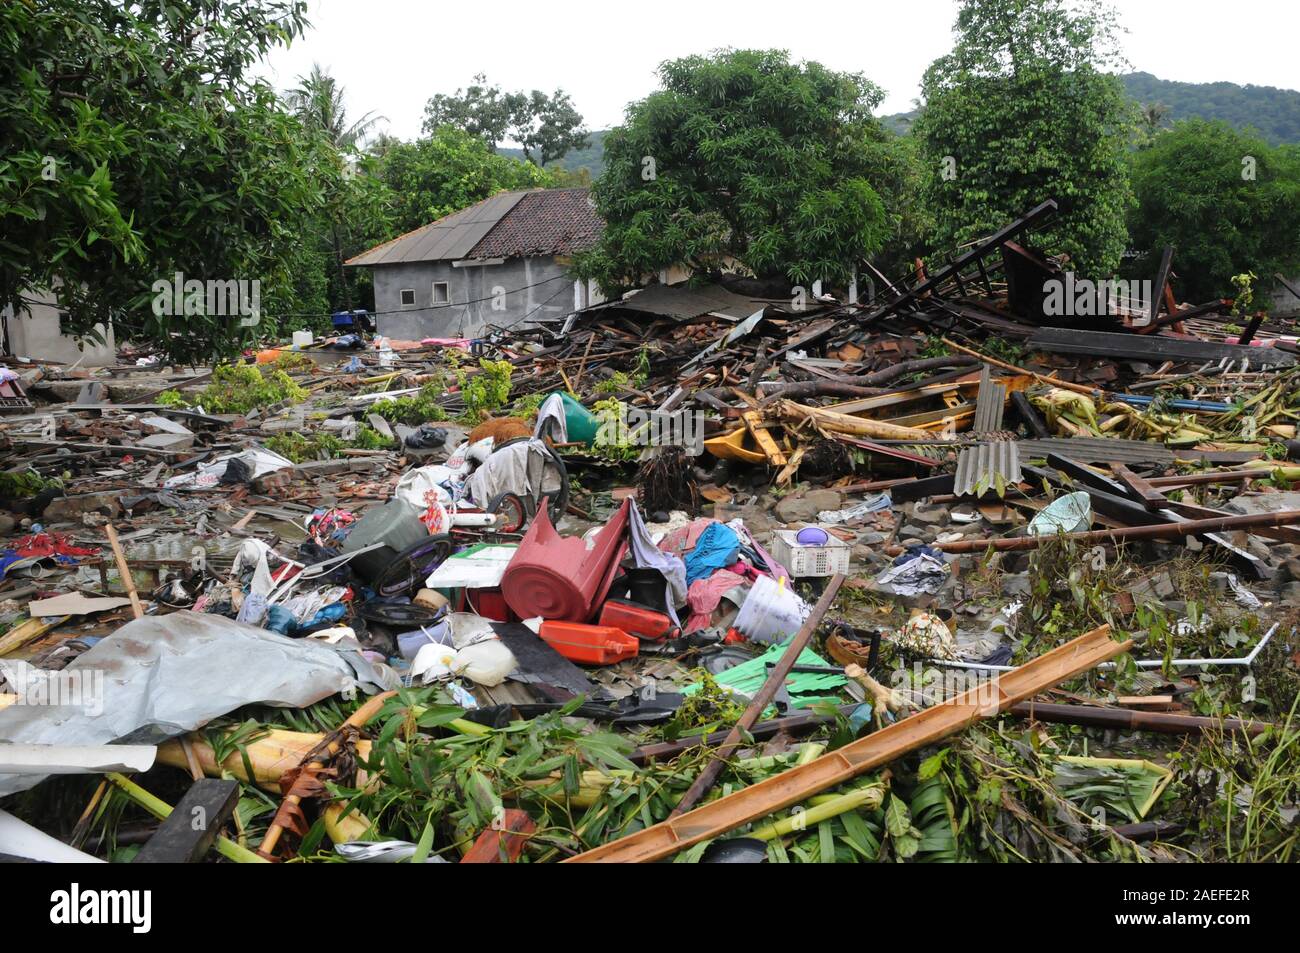 Tsunami victims collects items from a damaged house in Carita district, Banten province, Indonesia on December 28, 2018 Stock Photo